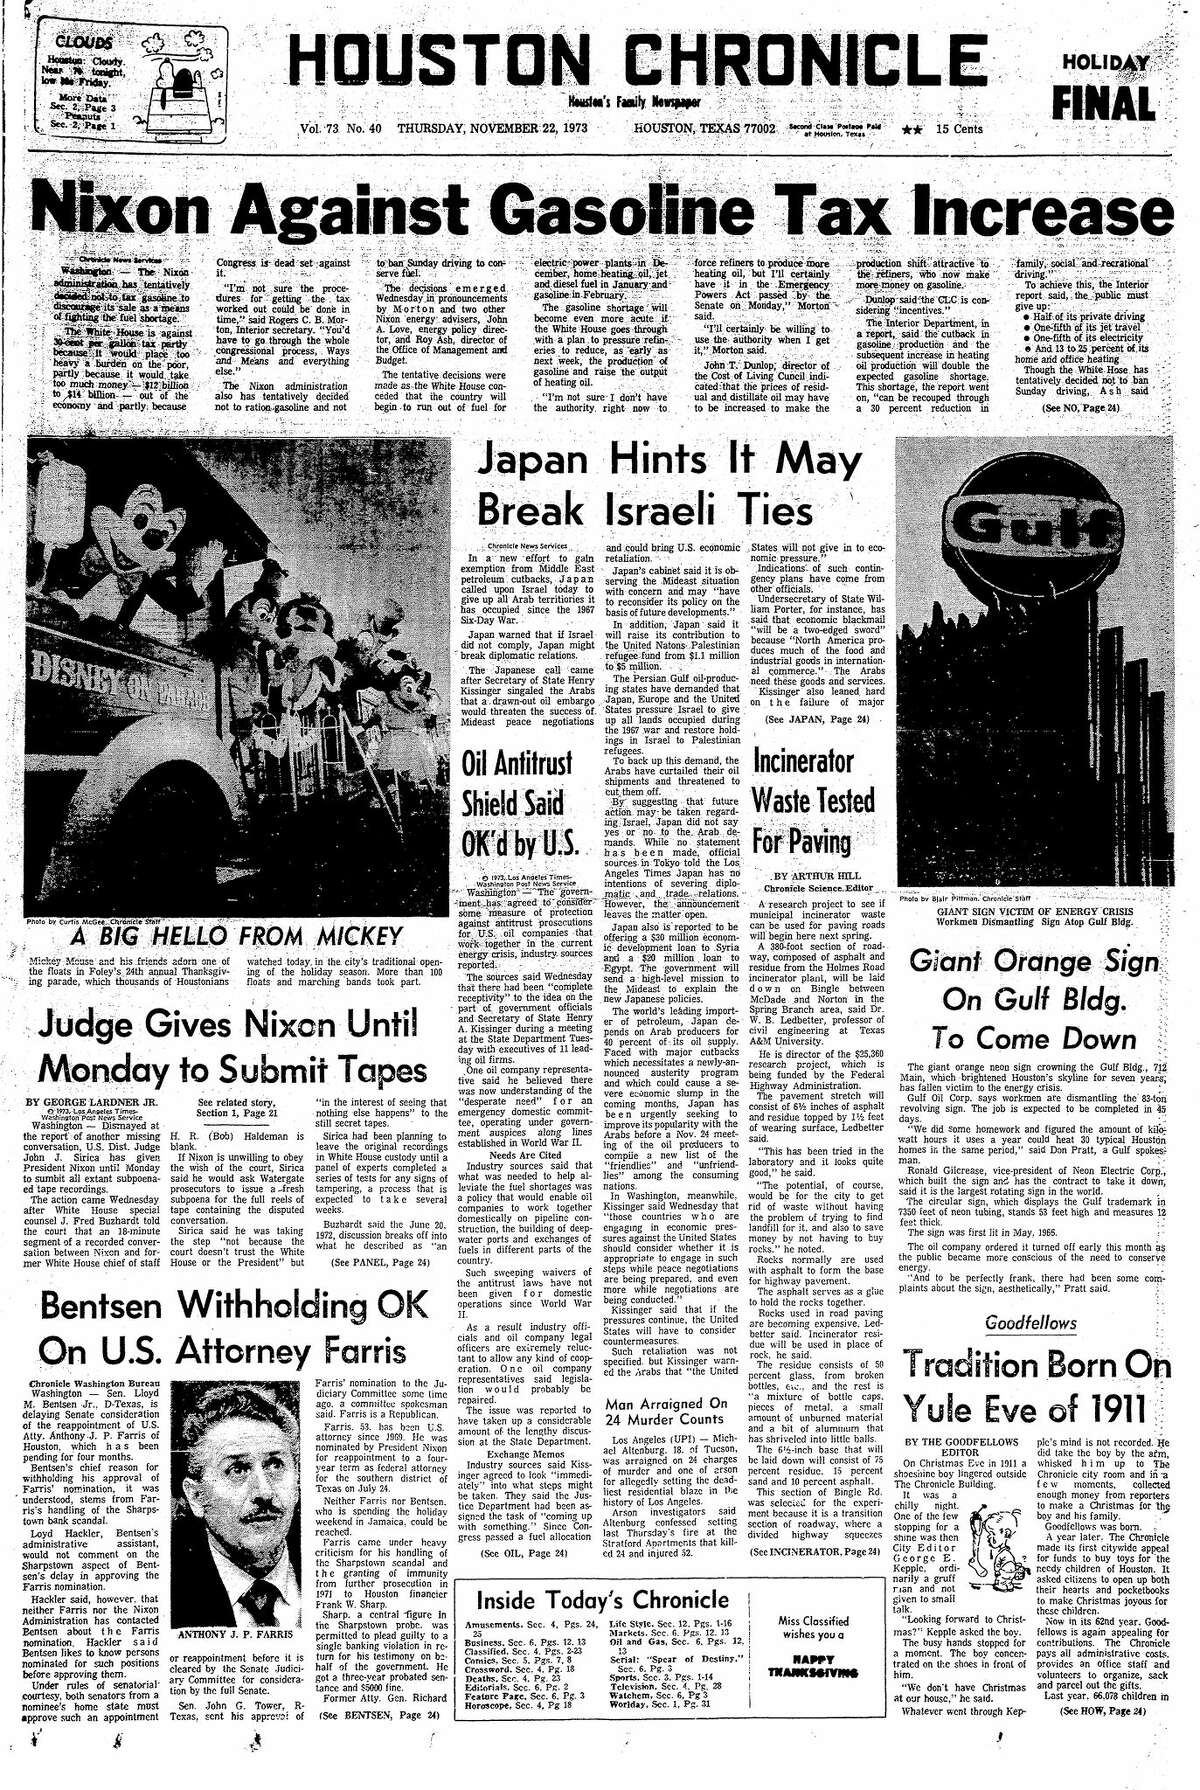 Houston Chronicle front page for Nov. 22, 1973.